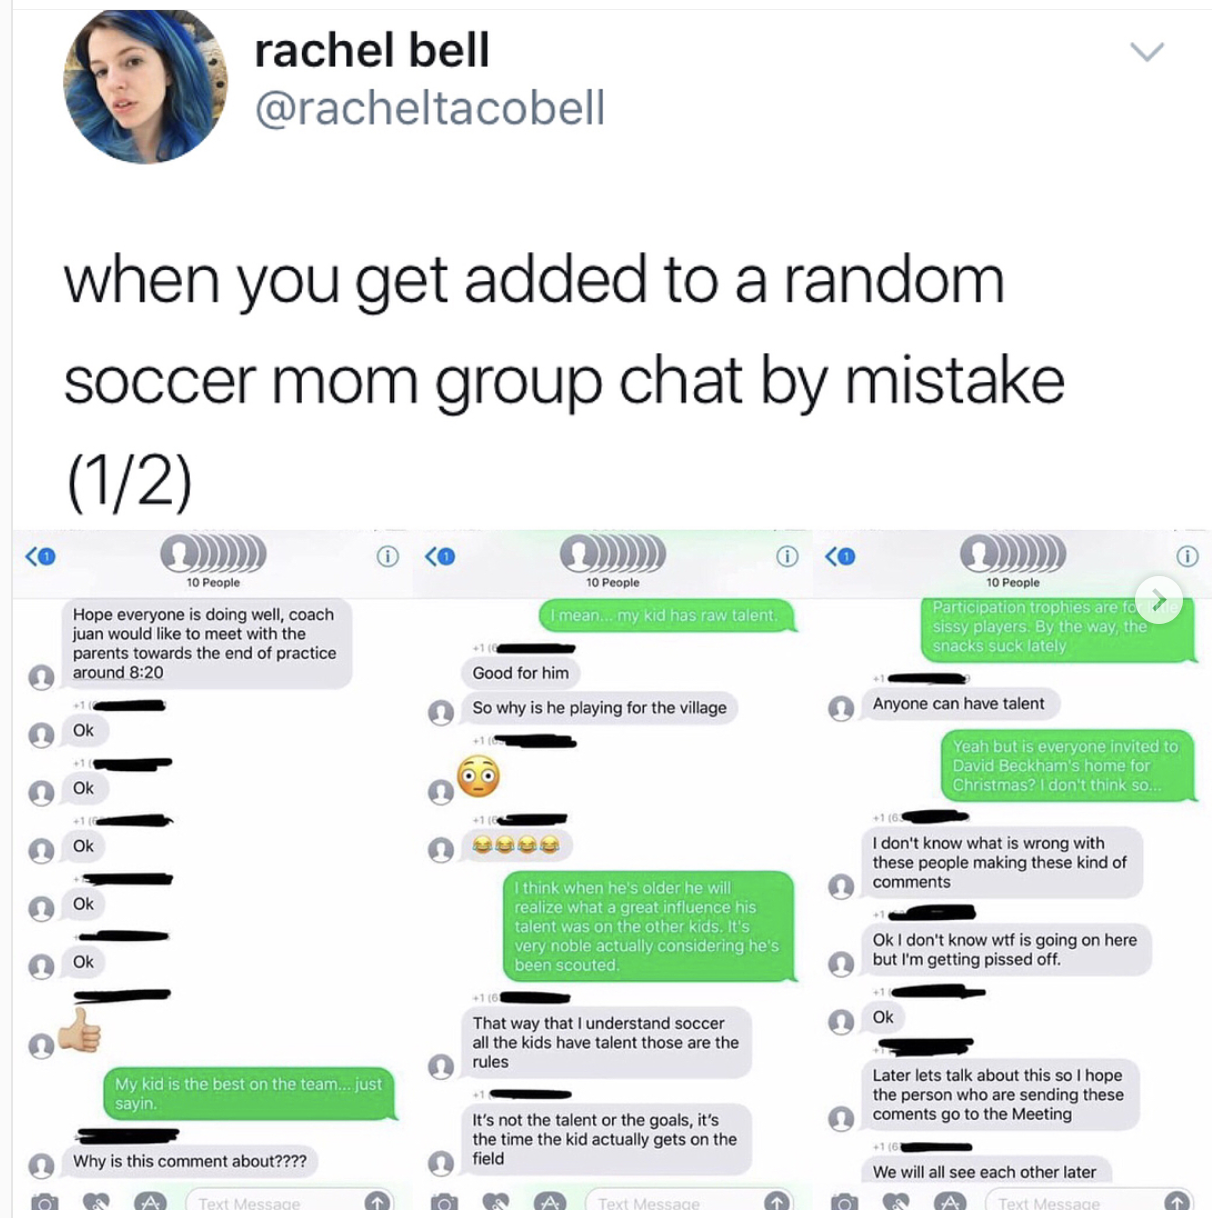 web page - rachel bell when you get added to a random soccer mom group chat by mistake 12 Hope everyone is doing well coach ma parents towards the end of practice wound Good for him So wyshe playing for the village Anyone can have talent Ce ! 11 I don't k